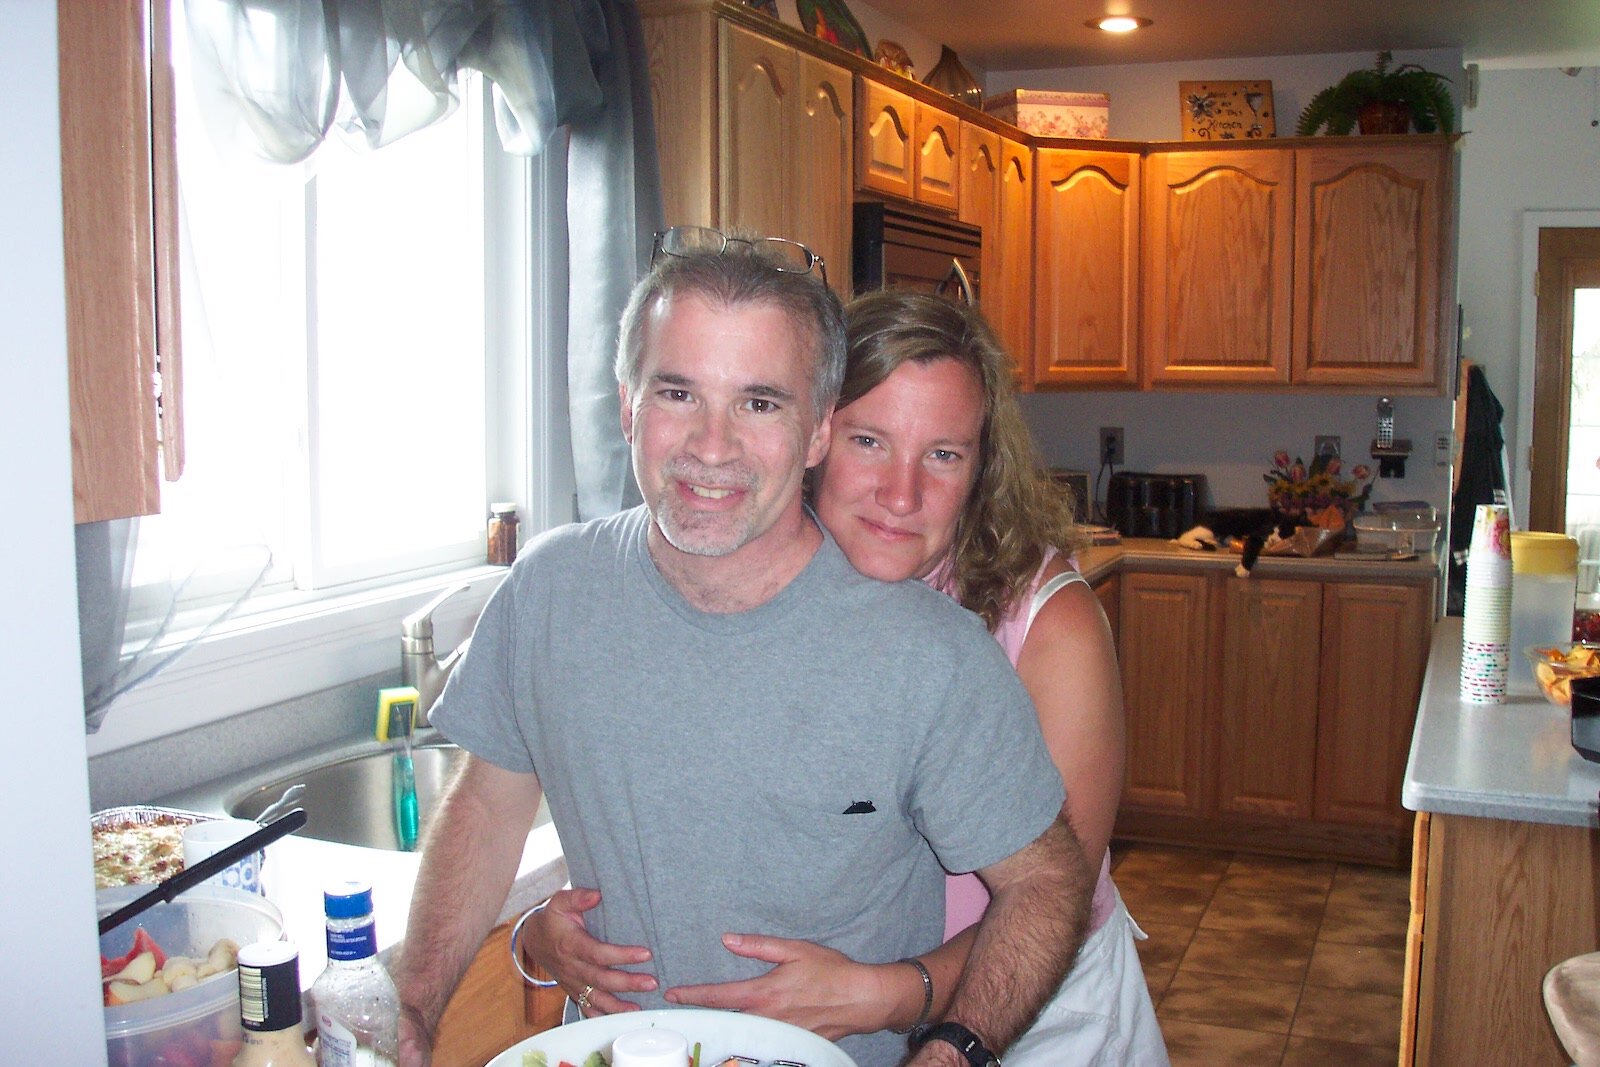 Darcy Thiel with her husband, Tim Colvin, who died in 2010 at age 48.